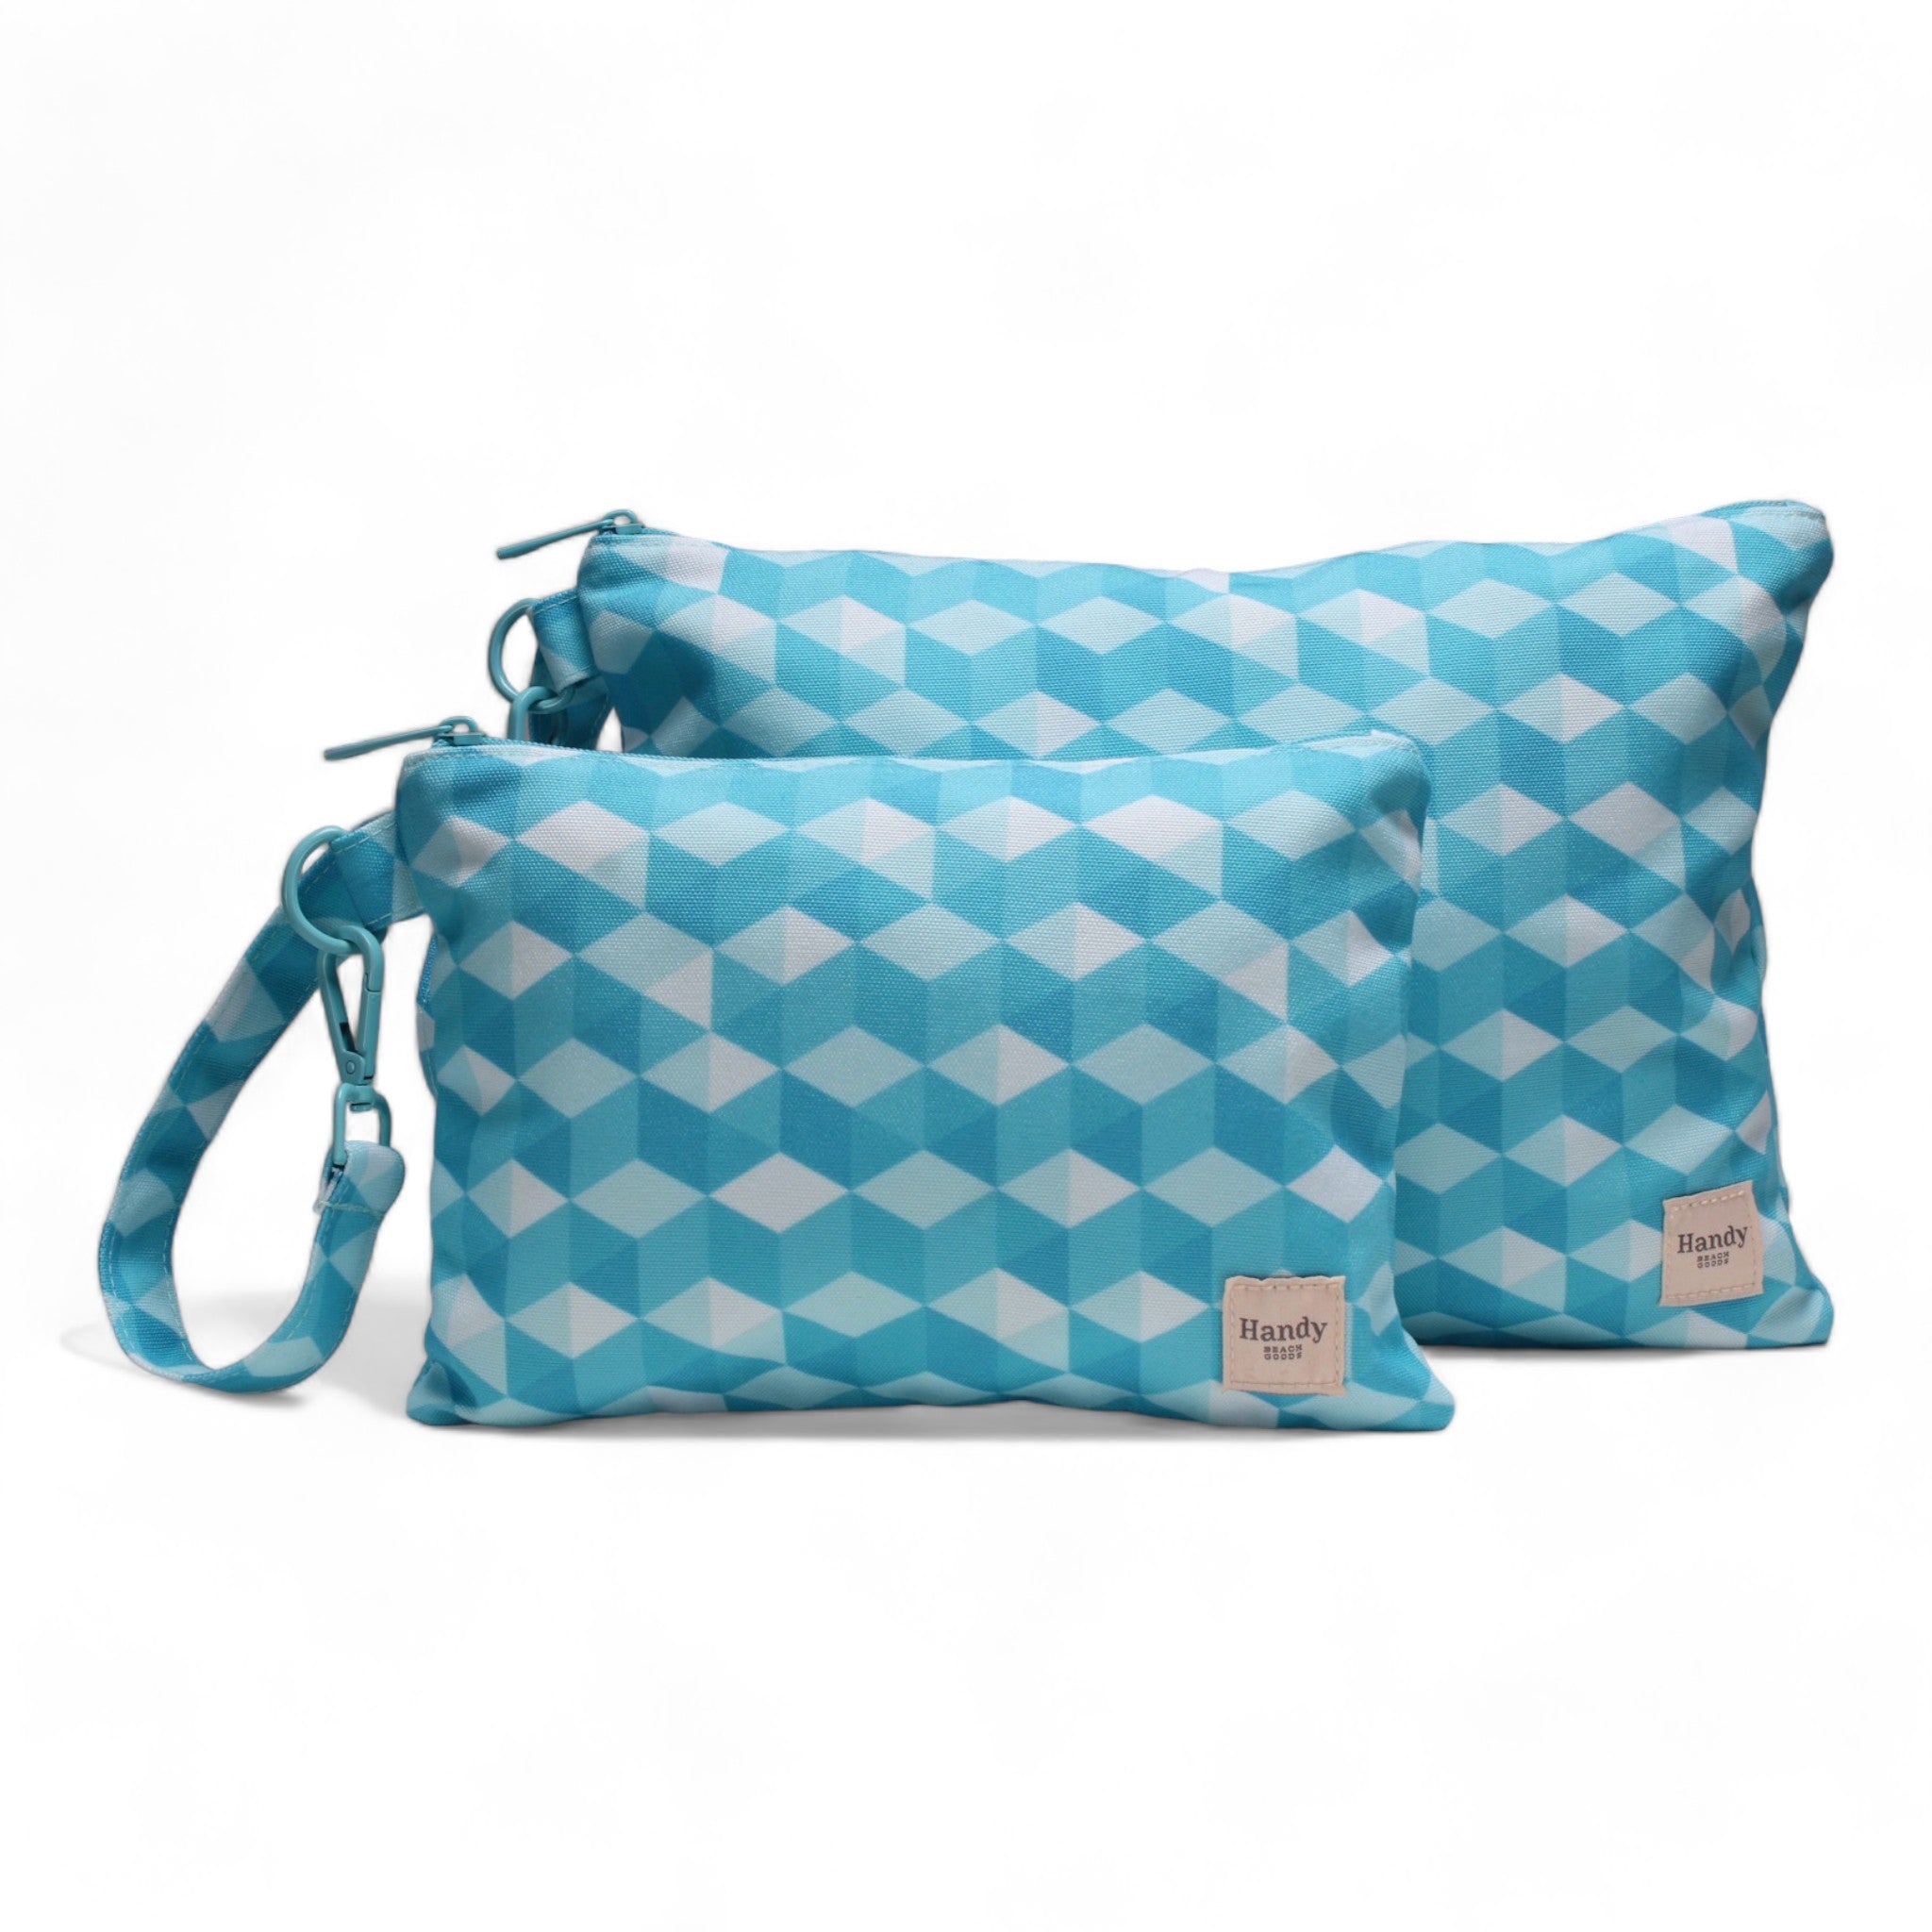 SEA MOSAIQUE - POUCH WITH WRISTLET BUCKLE - Handy Beach GoodsSEA MOSAIQUE - POUCH WITH WRISTLET BUCKLE